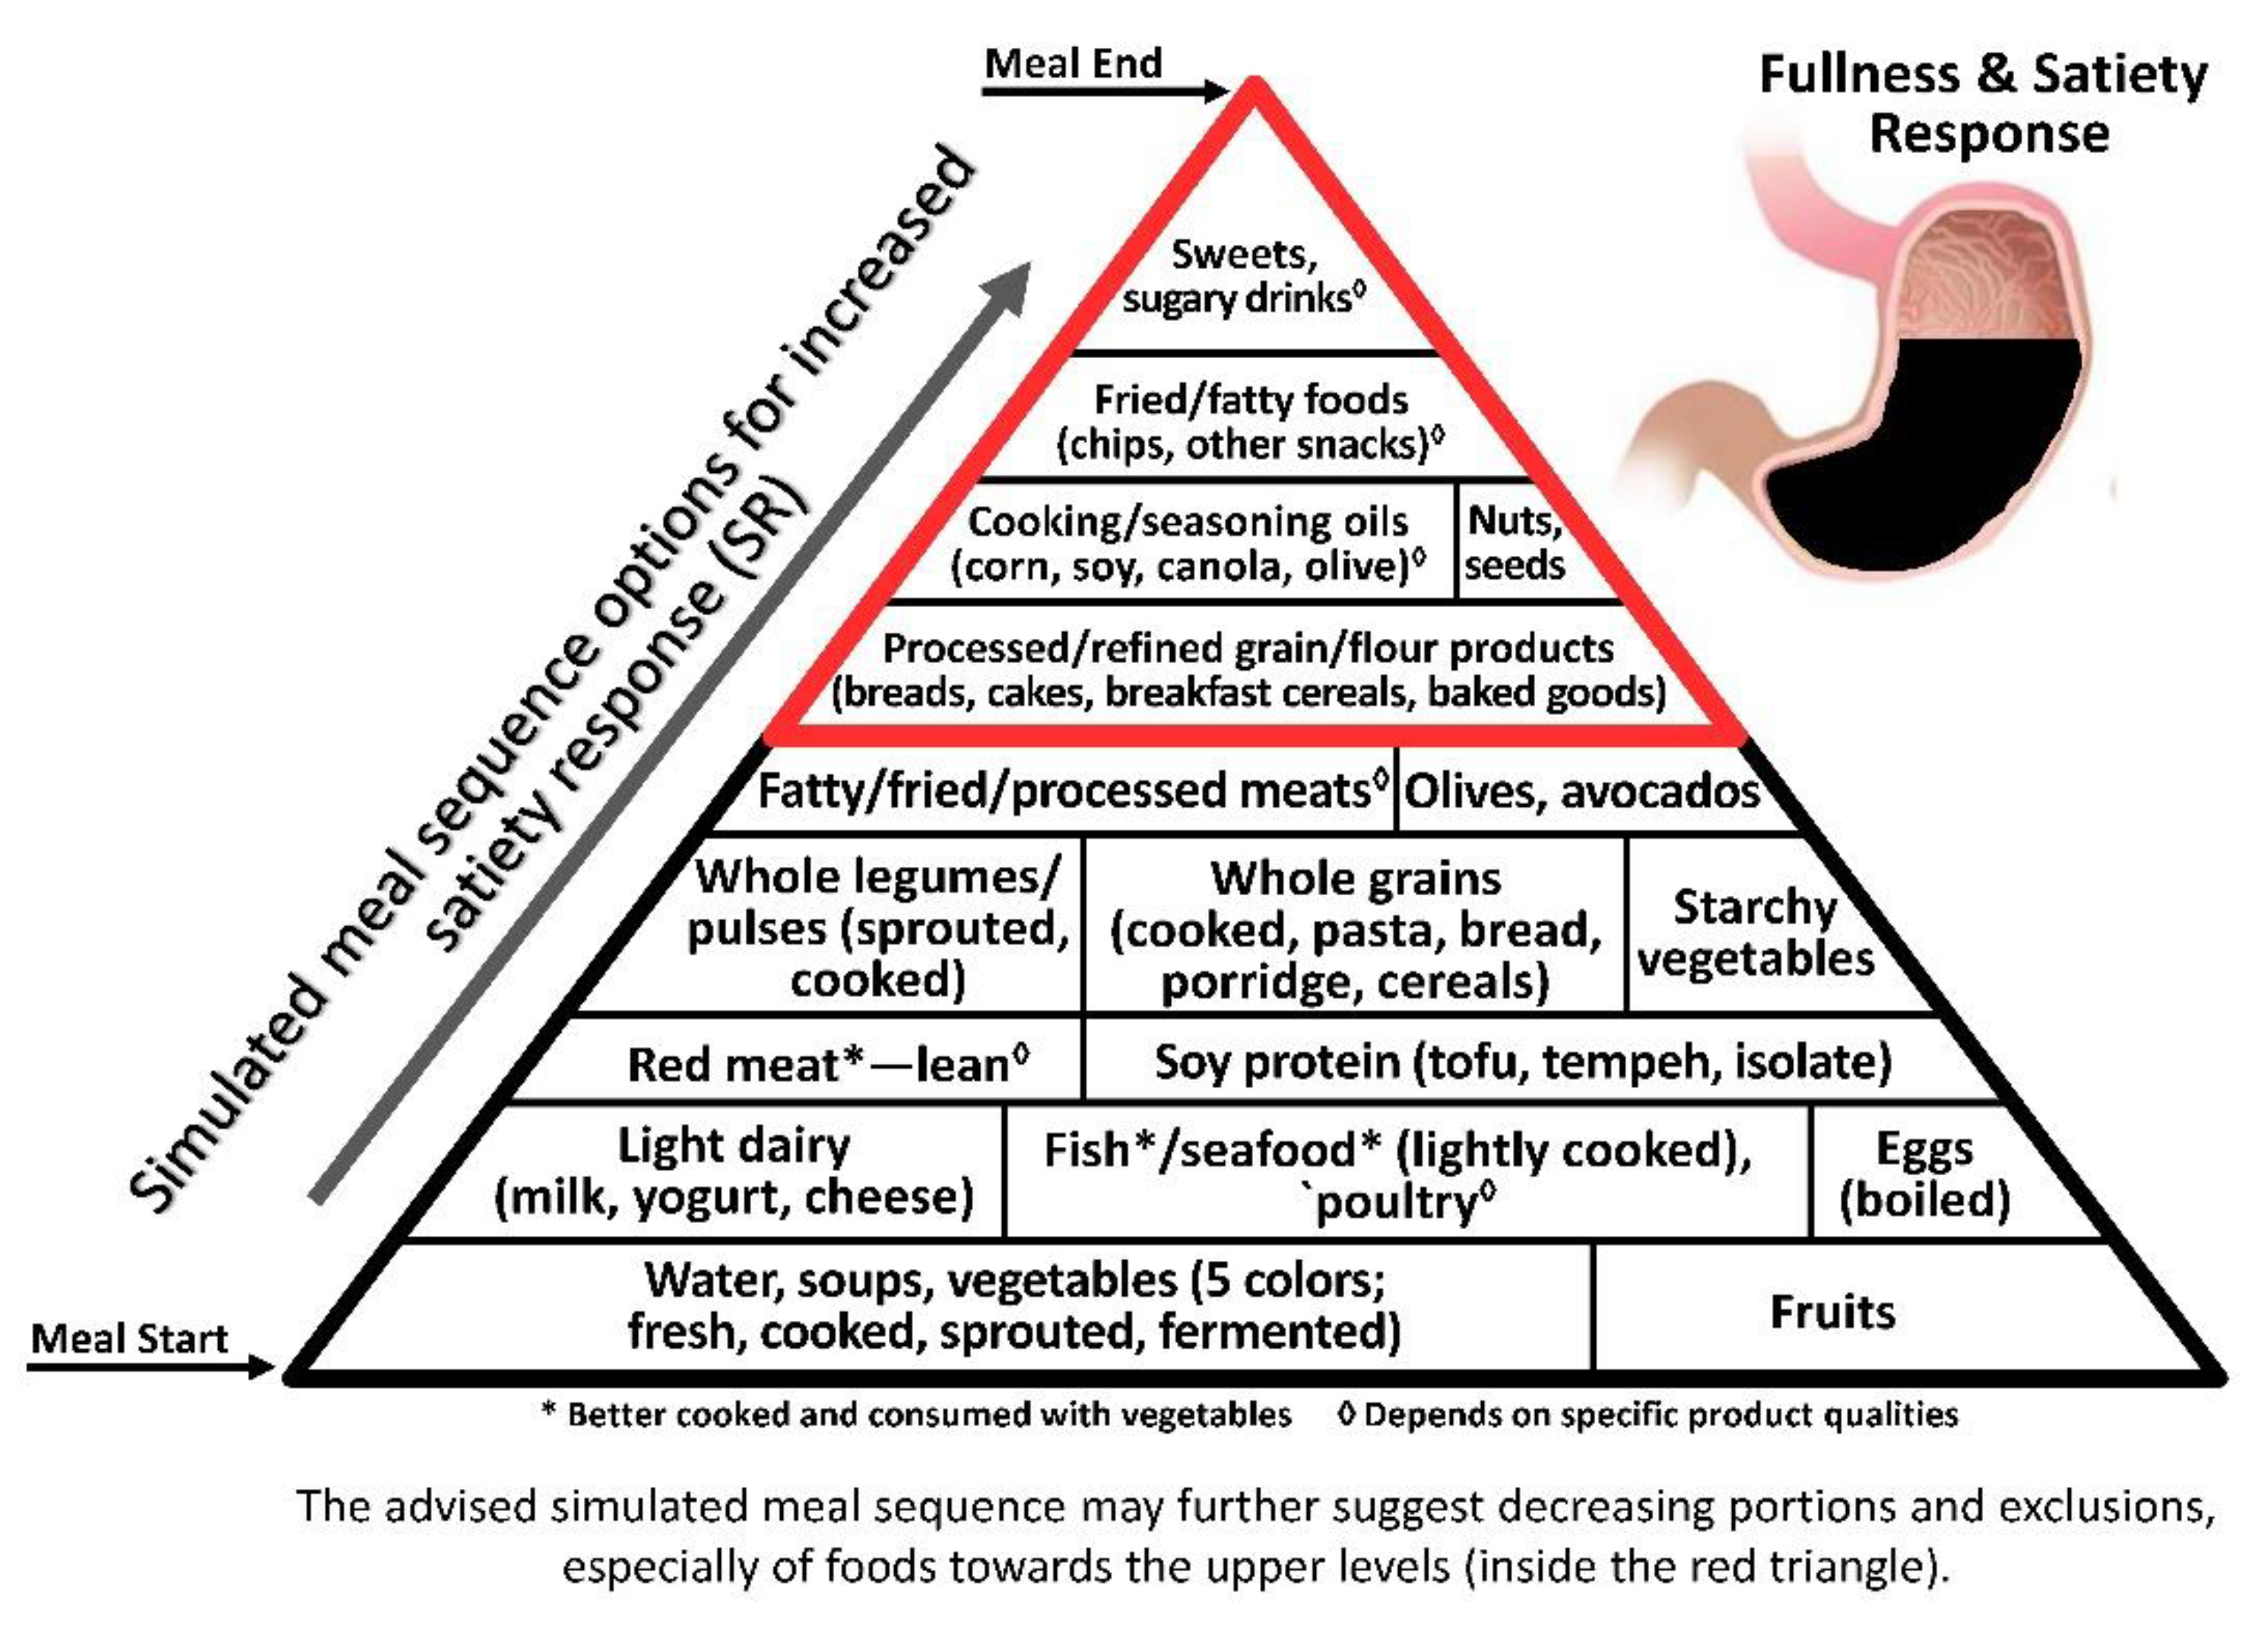 Fat intake and satiety